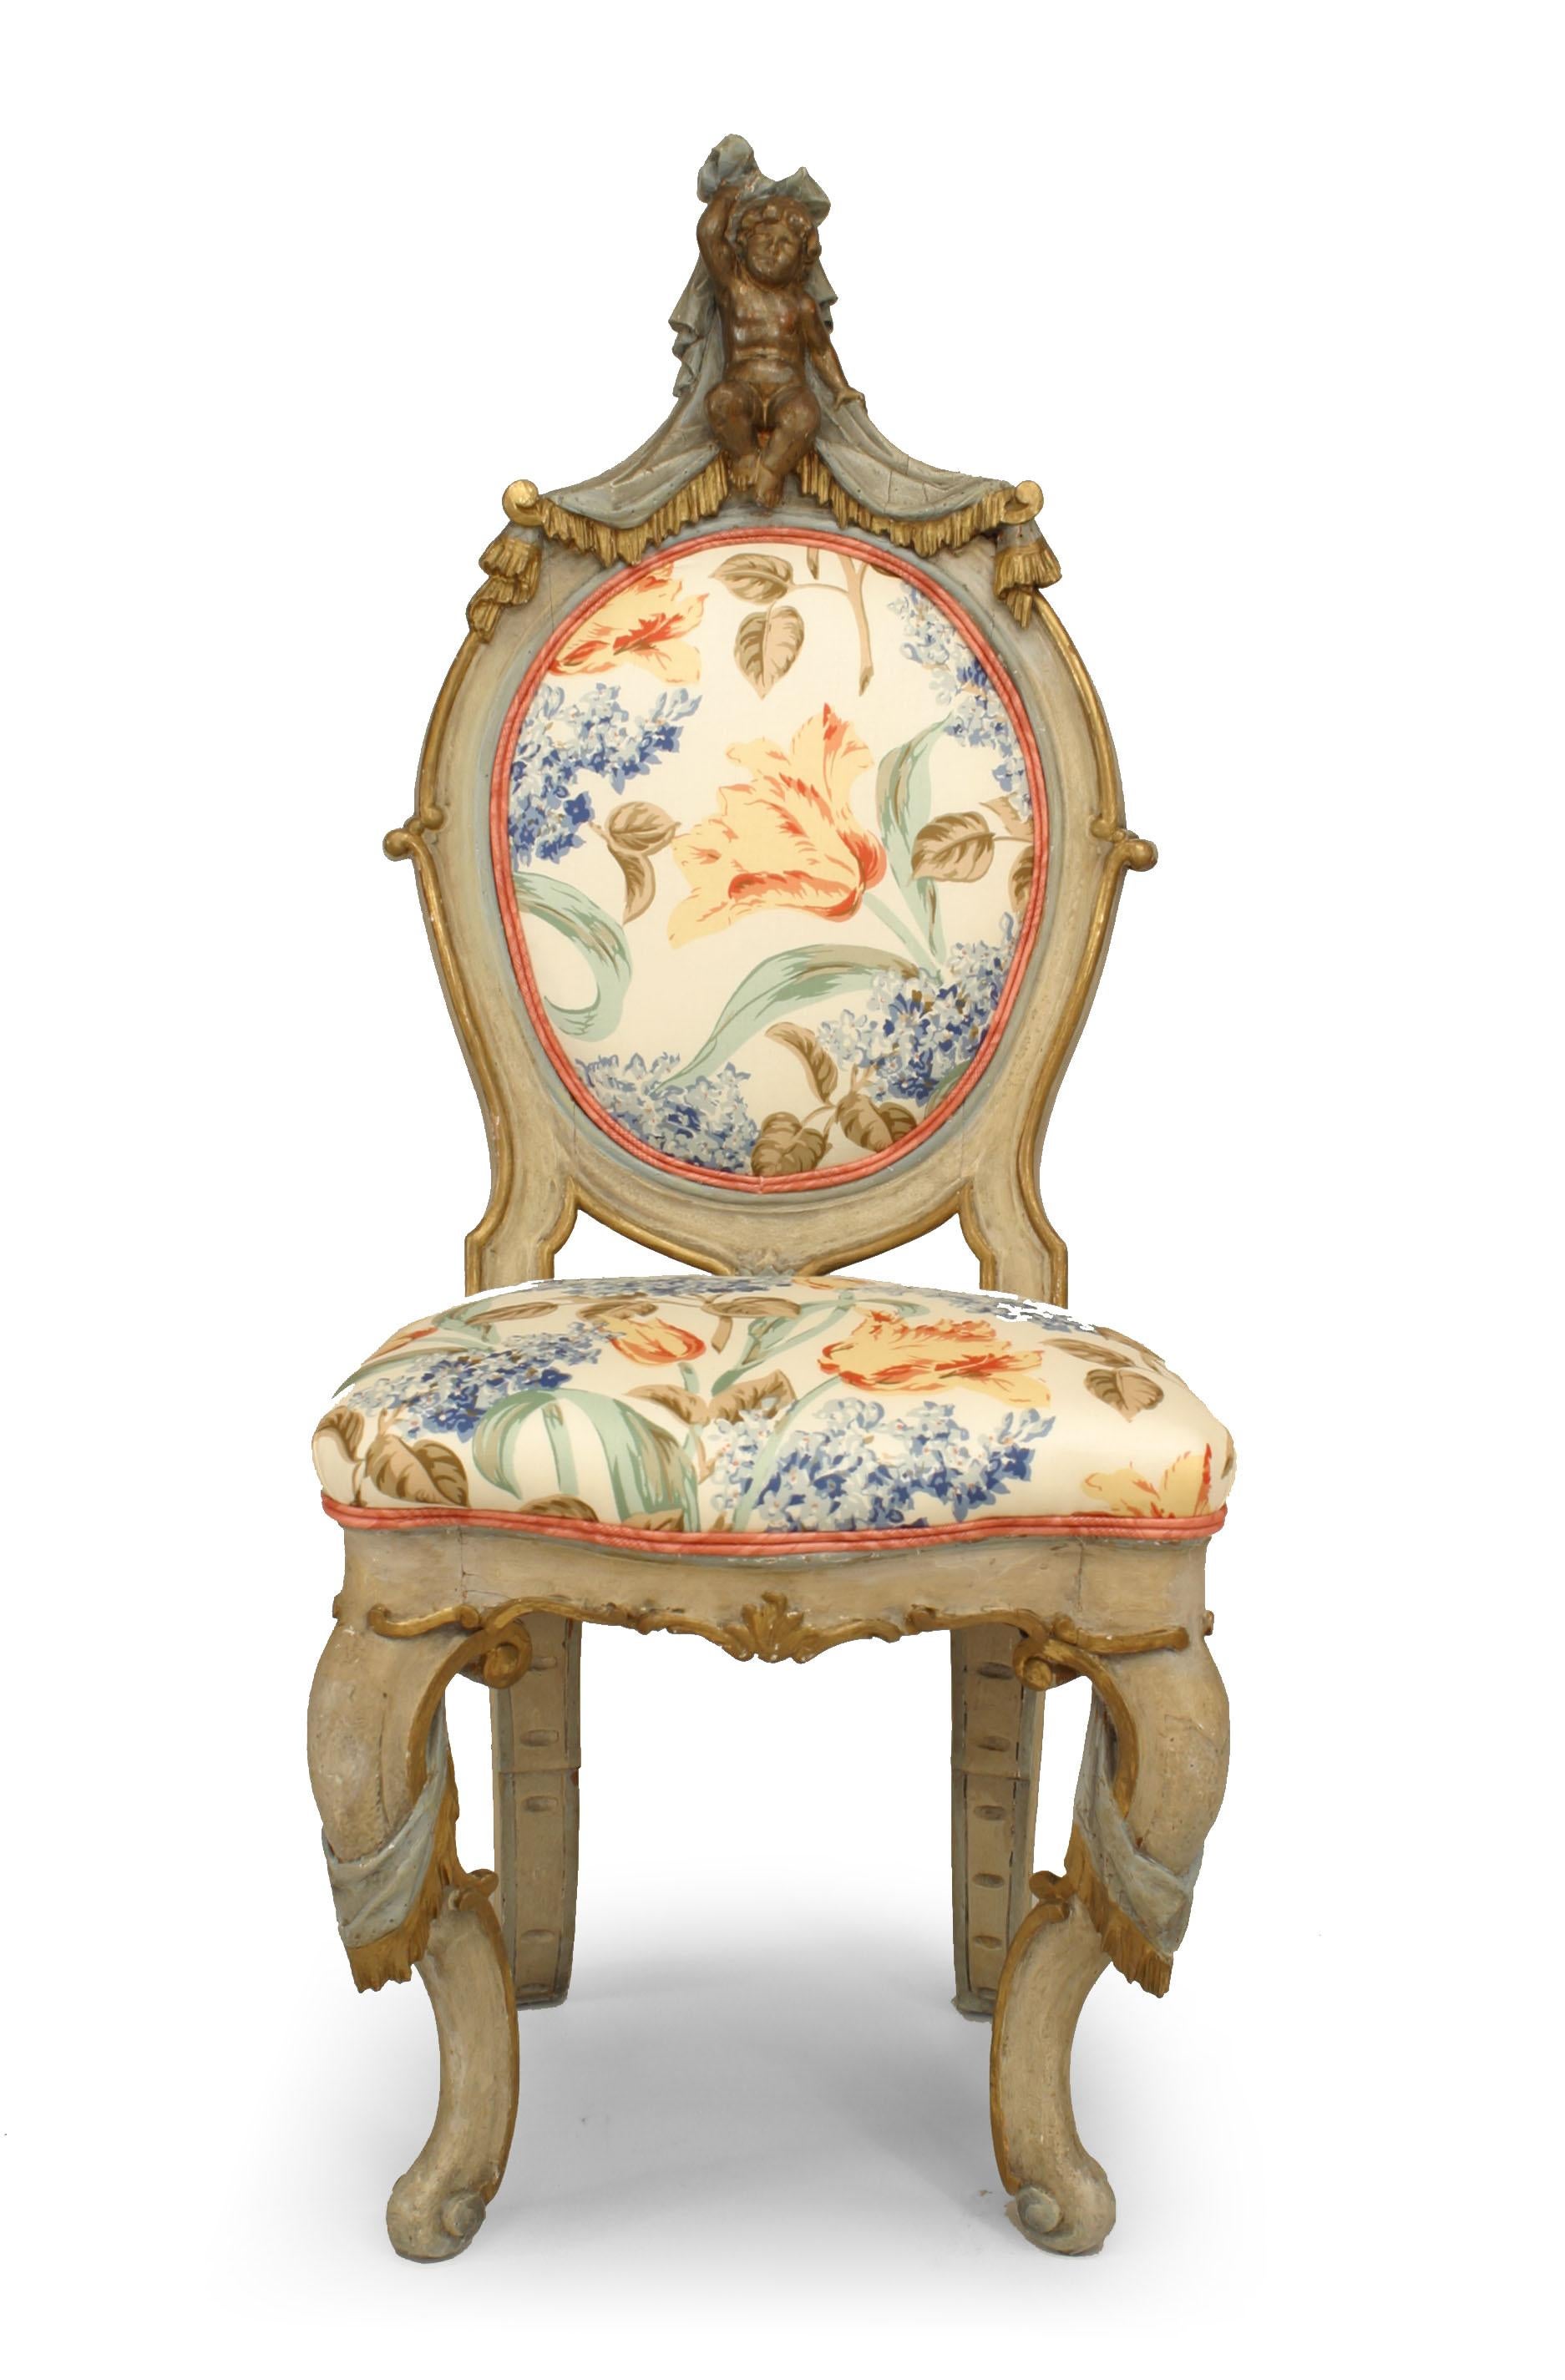 Pair of 19th century Italian Venetian style white and blue painted and gilt trimmed side chairs with drape and cupid carved backs.